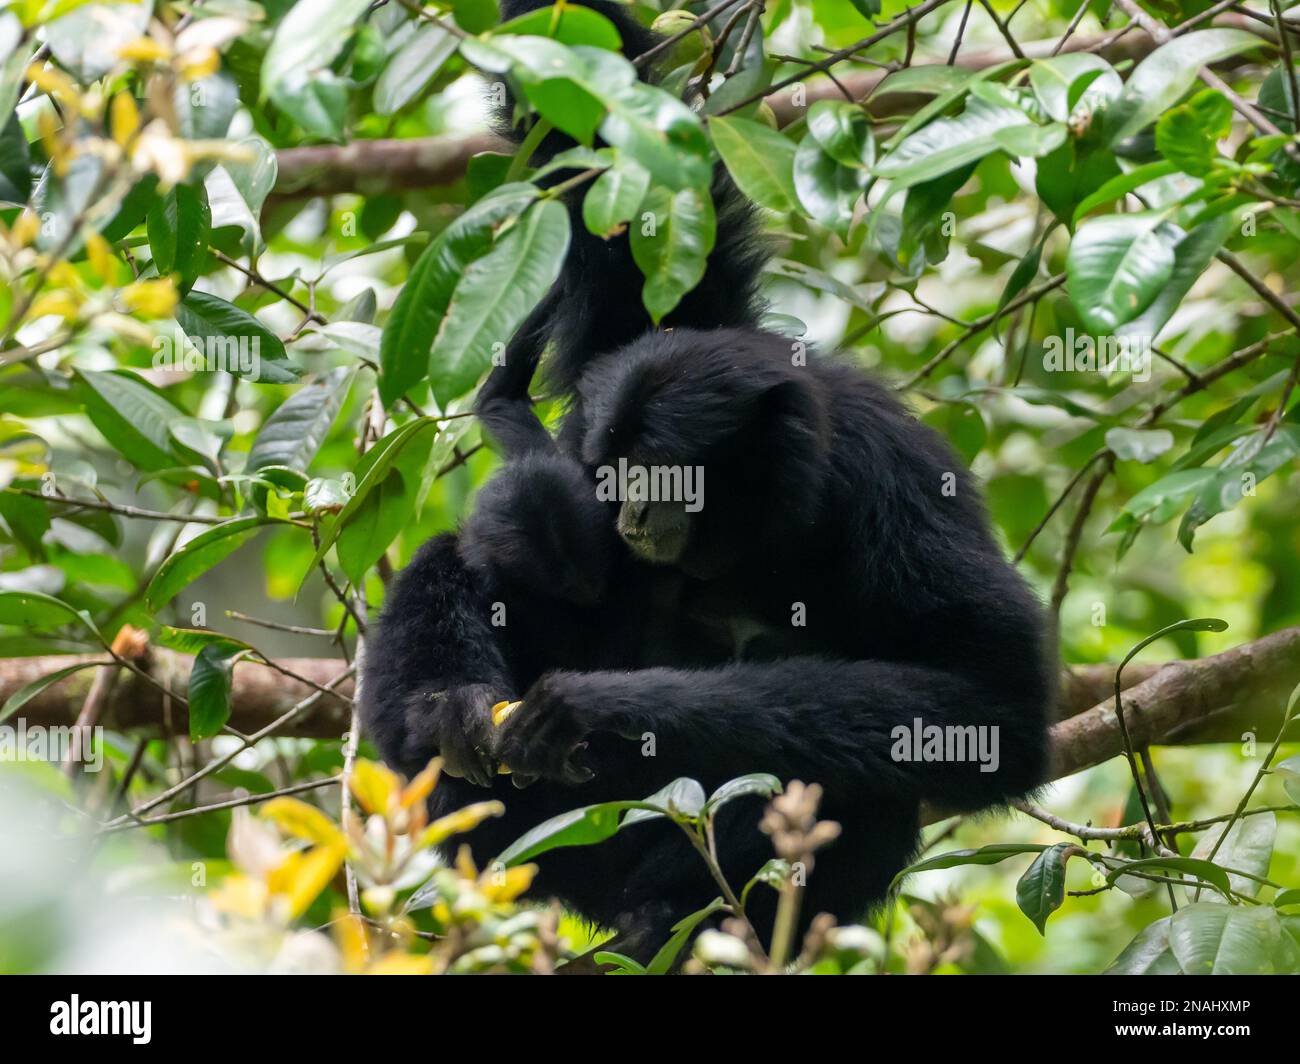 Siamang, Symphalangus syndactylus, the largest of all gibbons, and endangered species found in Malaysia Stock Photo